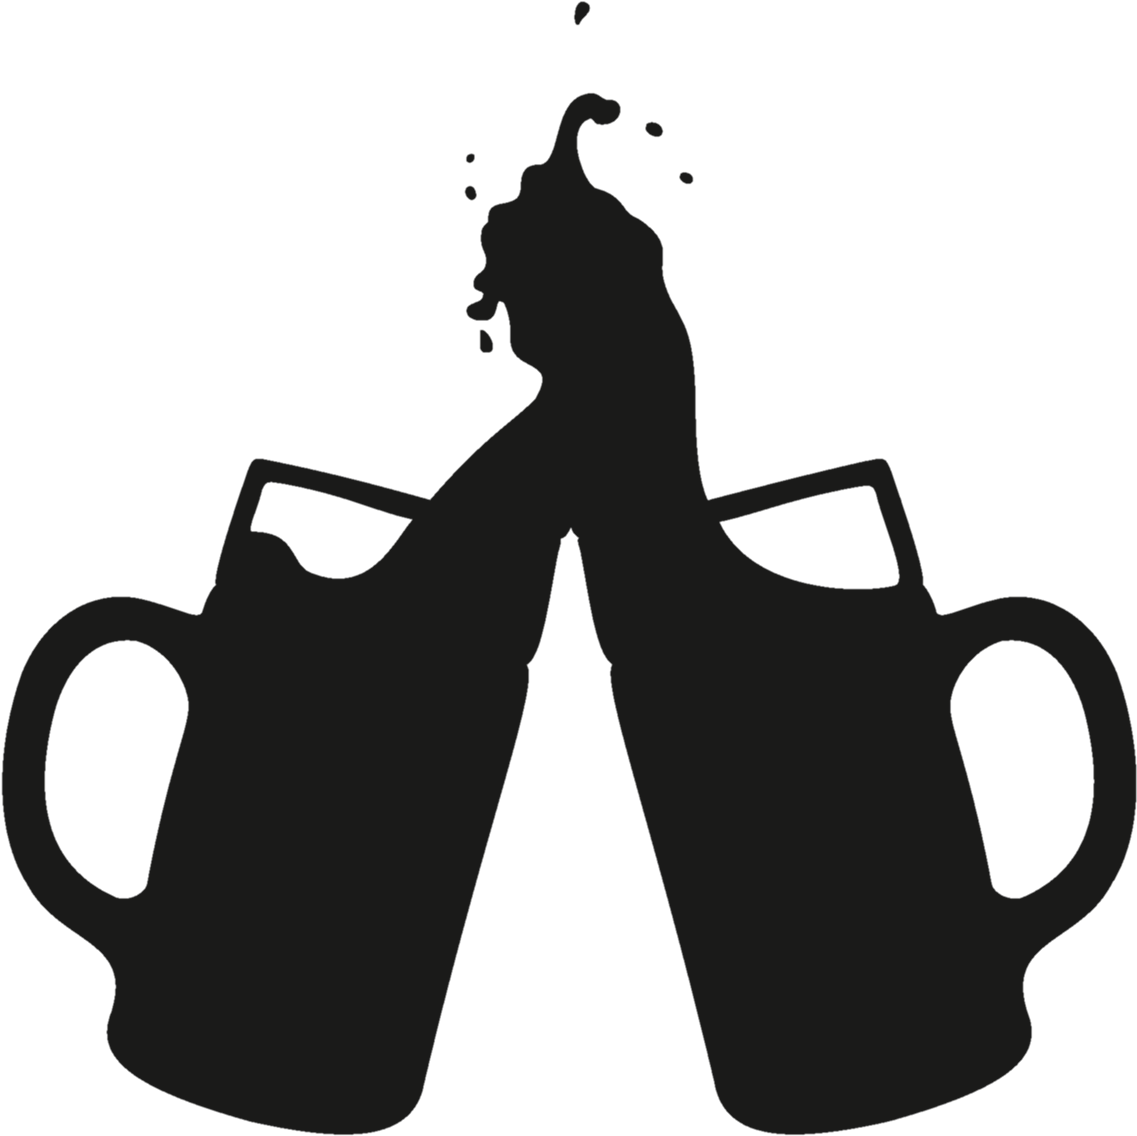 Prost - Beer Mug Silhouette Png (1200x1204), Png Download